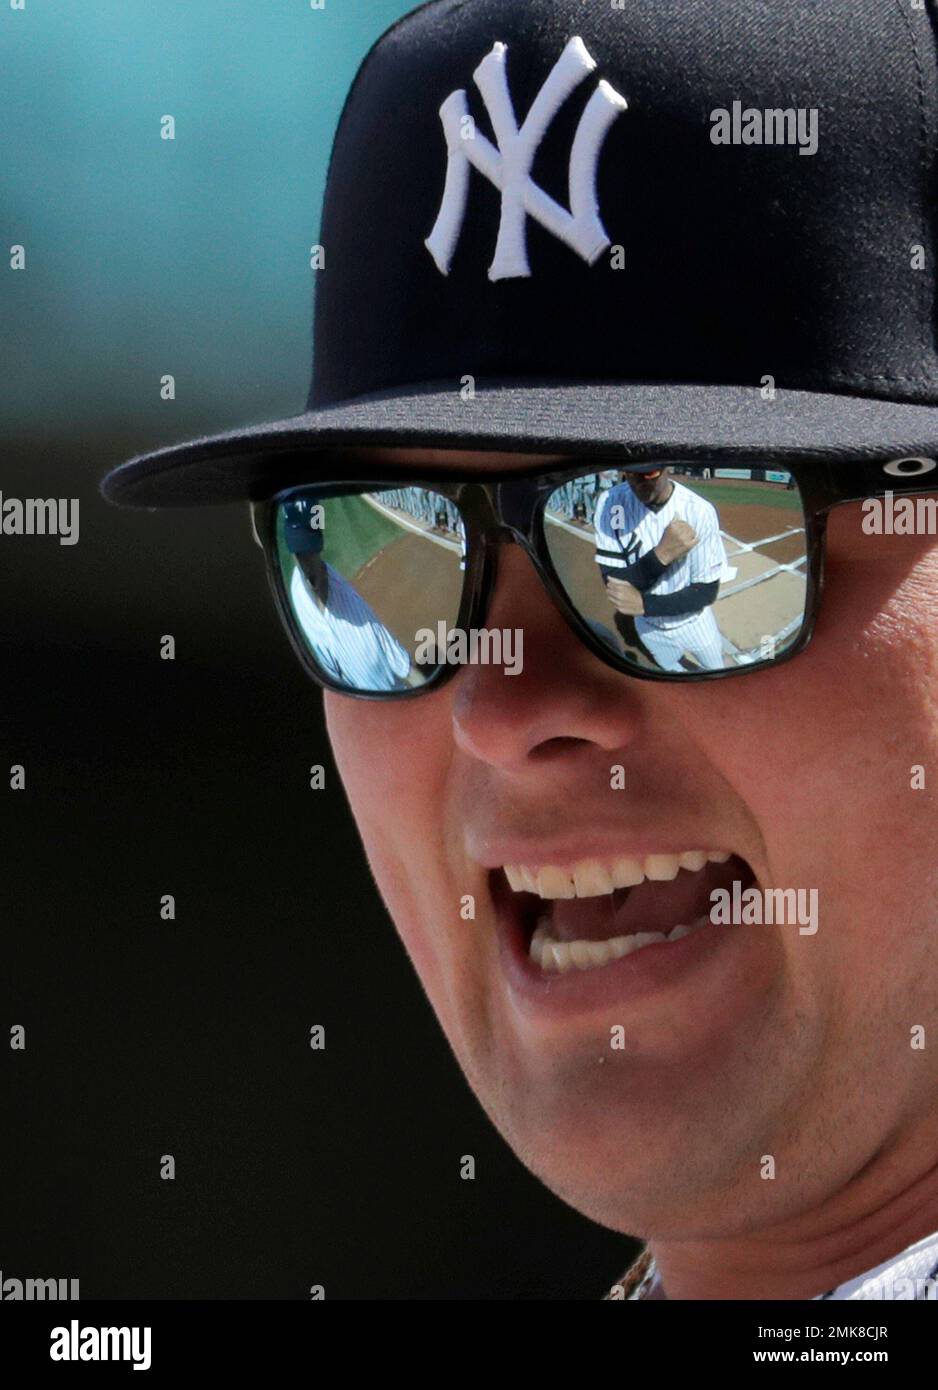 New York Yankees manager Aaron Boone is reflected in the